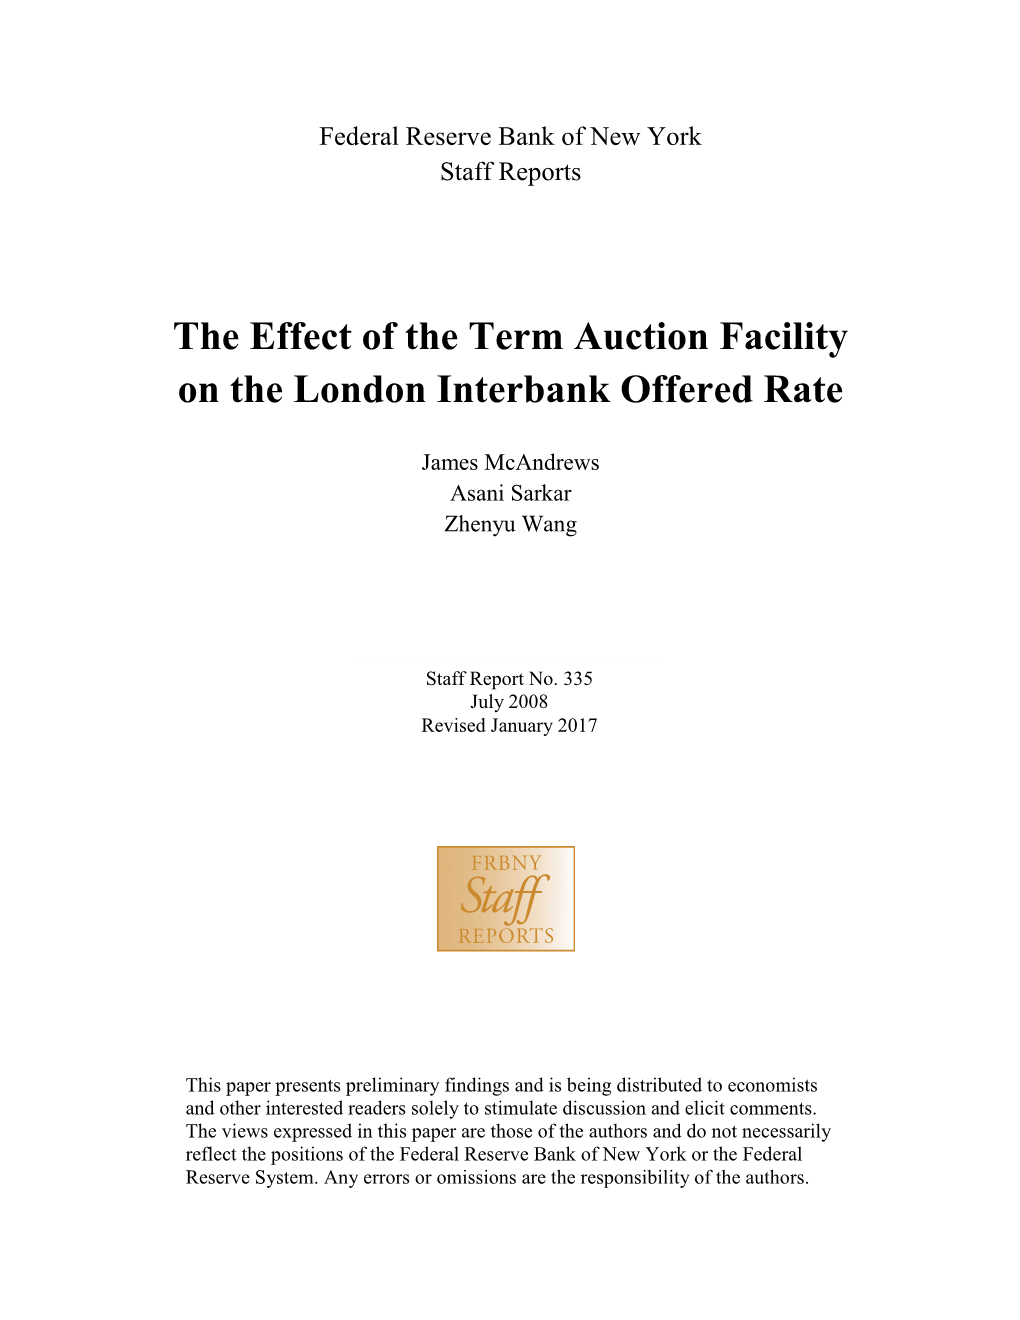 Effect of the Term Auction Facility on the London Interbank Offered Rate